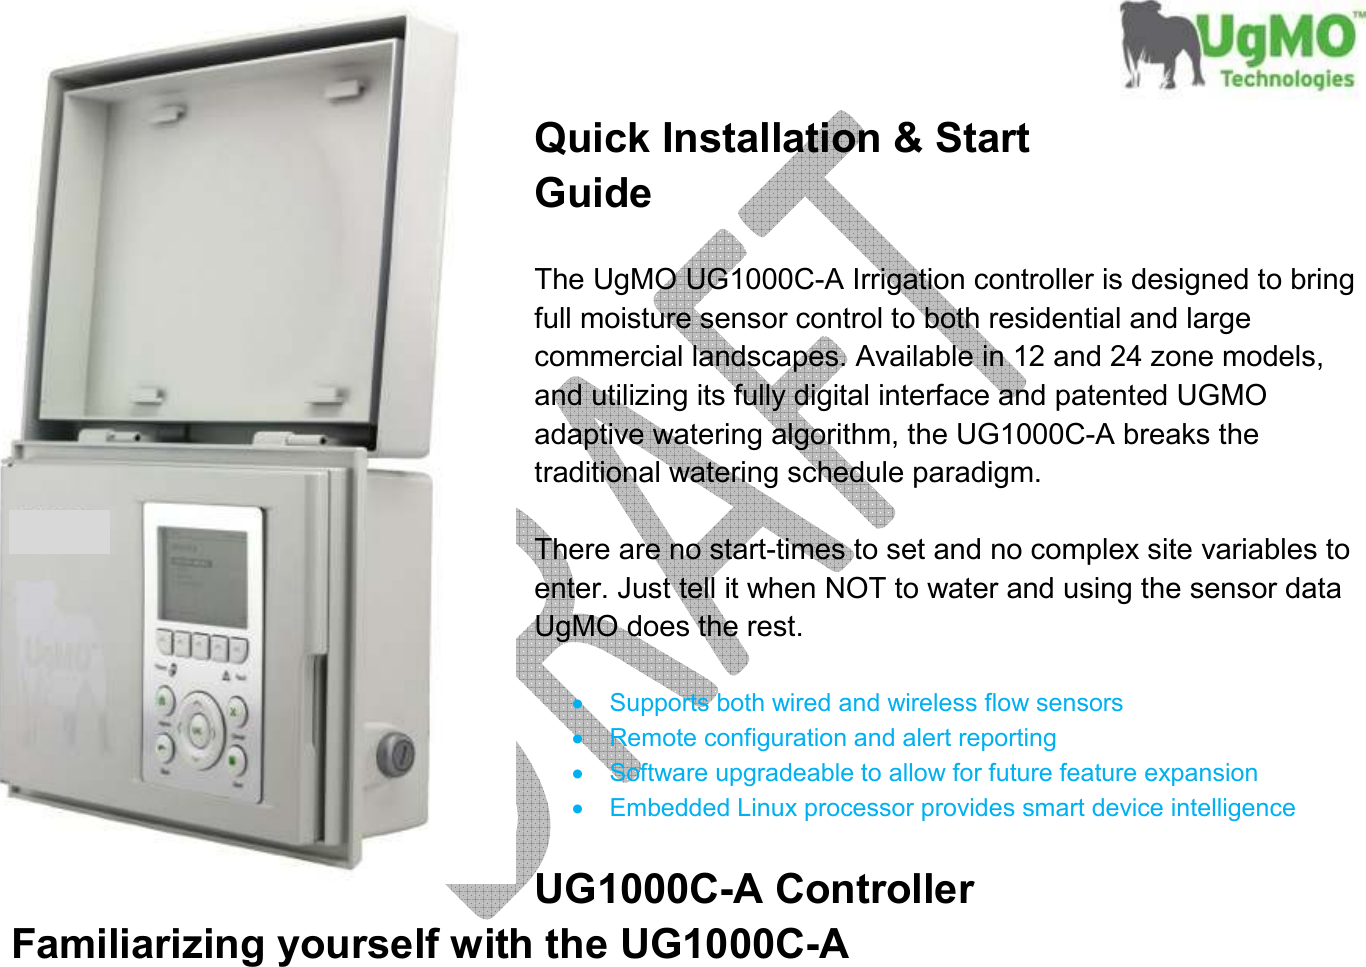       Quick Installation &amp; Start Guide  The UgMO UG1000C-A Irrigation controller is designed to bring full moisture sensor control to both residential and large commercial landscapes. Available in 12 and 24 zone models, and utilizing its fully digital interface and patented UGMO adaptive watering algorithm, the UG1000C-A breaks the traditional watering schedule paradigm.  There are no start-times to set and no complex site variables to enter. Just tell it when NOT to water and using the sensor data UgMO does the rest.  •  Supports both wired and wireless flow sensors •  Remote configuration and alert reporting •  Software upgradeable to allow for future feature expansion •  Embedded Linux processor provides smart device intelligence  UG1000C-A Controller Familiarizing yourself with the UG1000C-A 